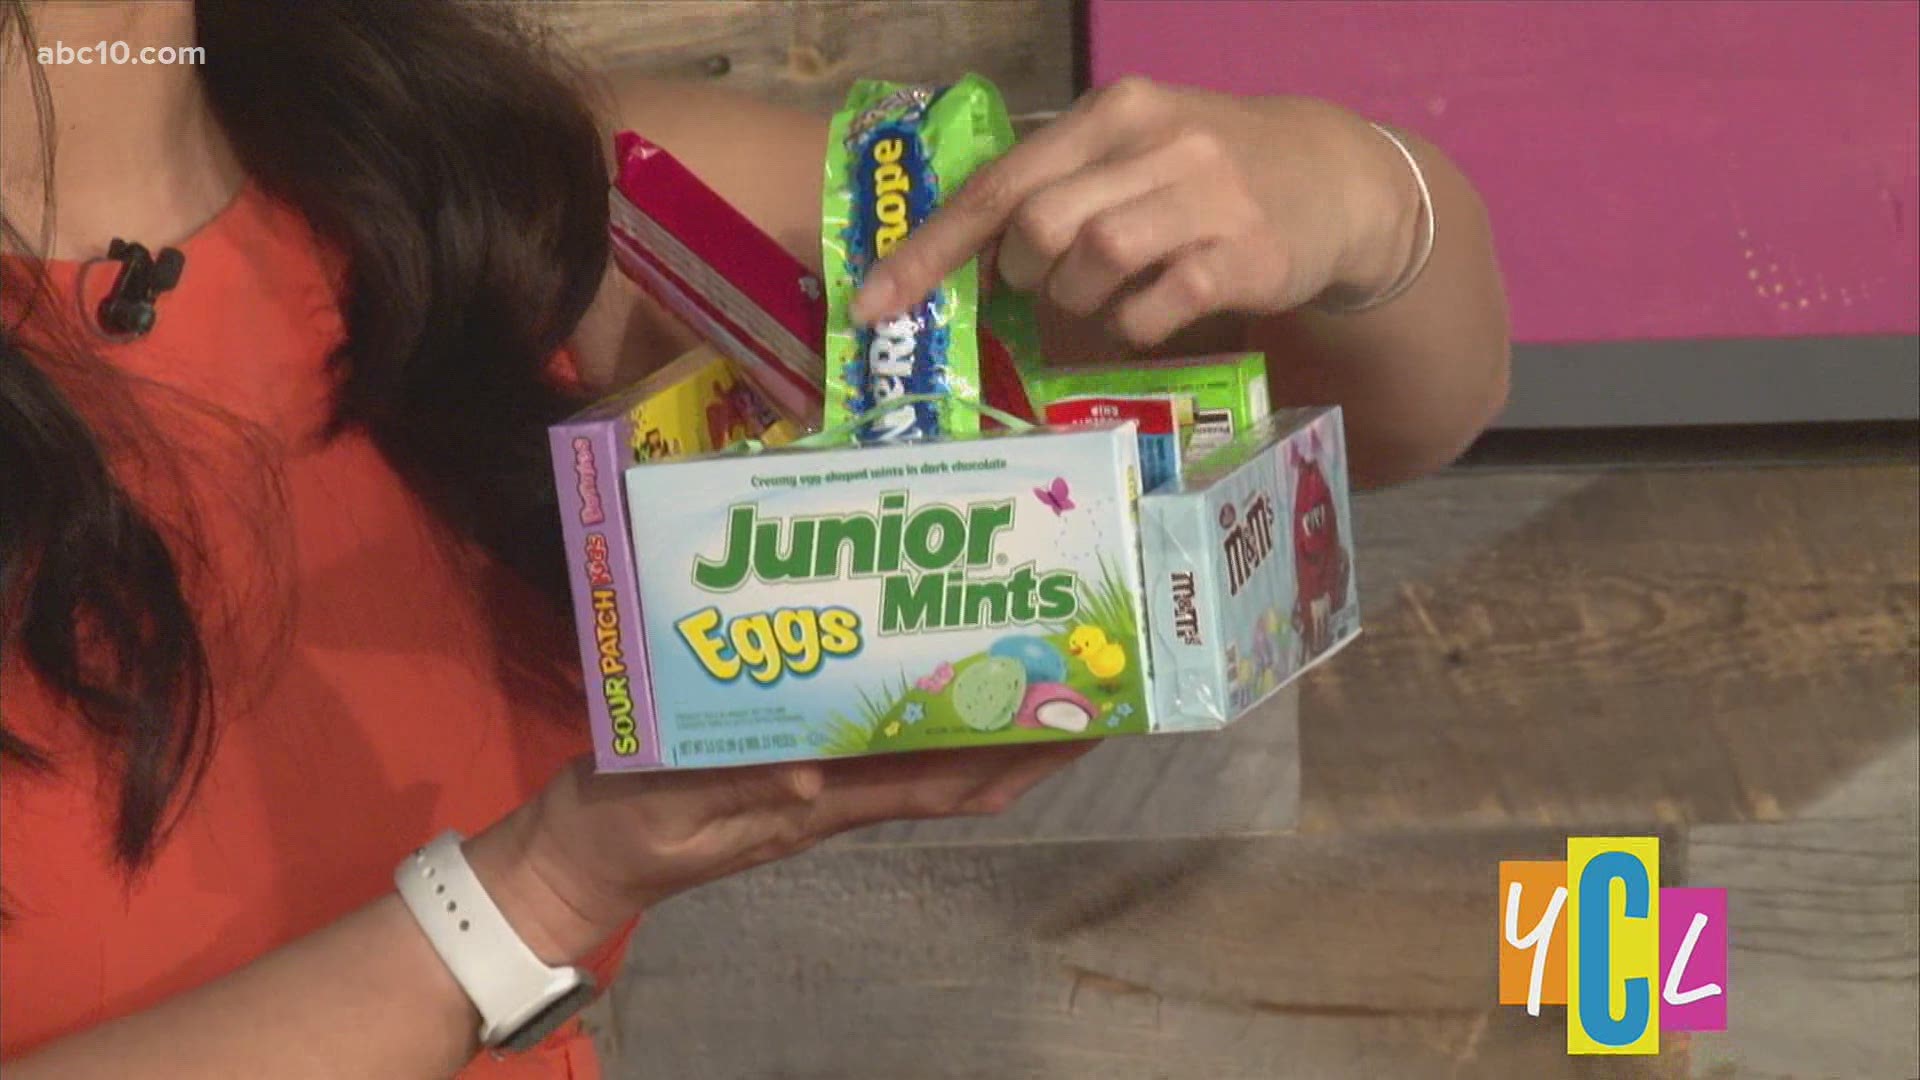 We’re hopping into Easter with an "egg-cellent" way to DIY personalized baskets made out of candy for less than $10!